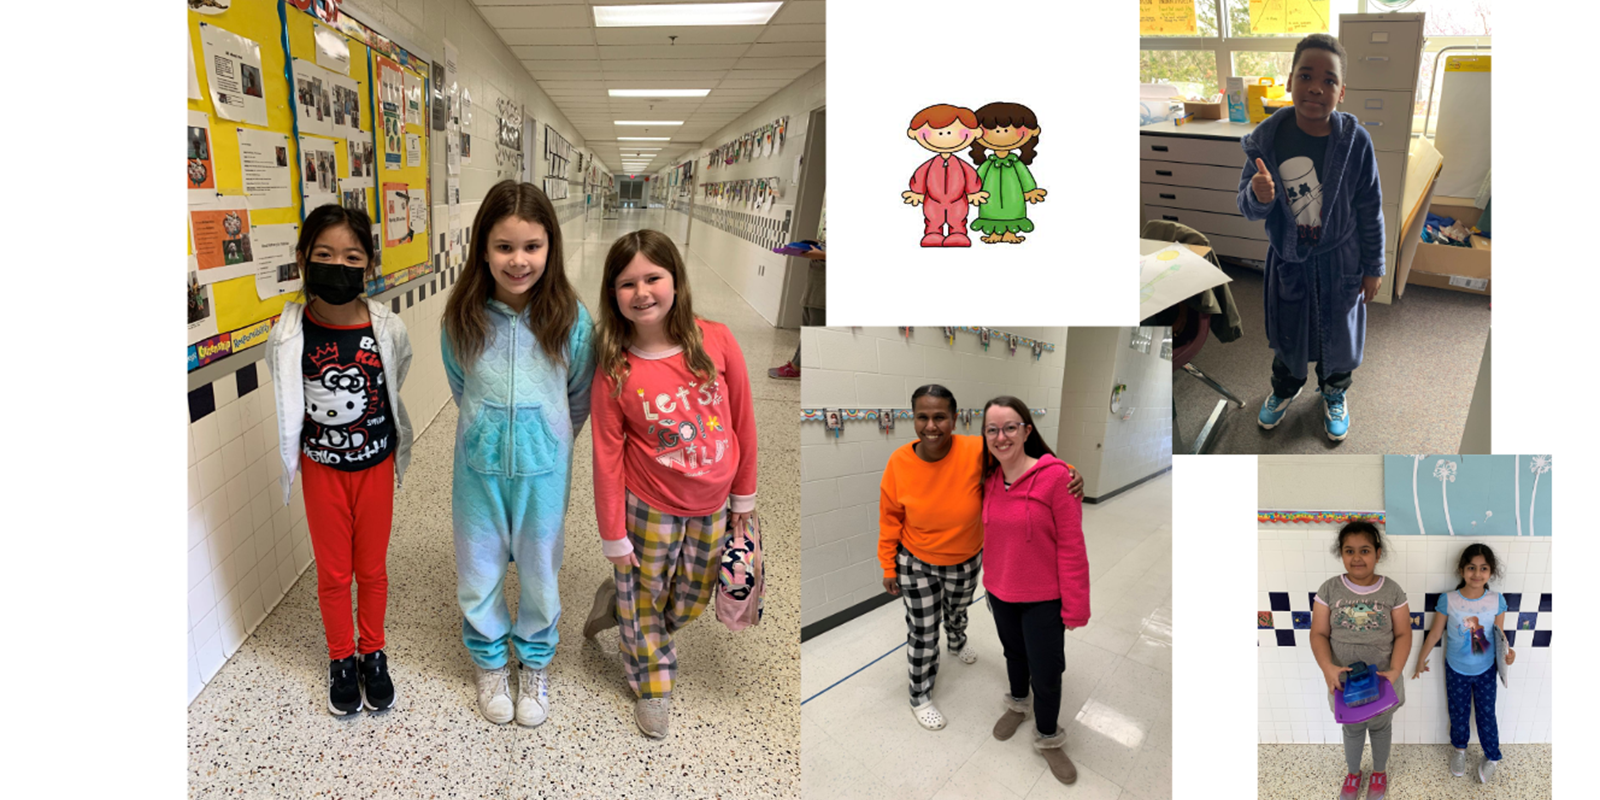 Students and staff in pajamas